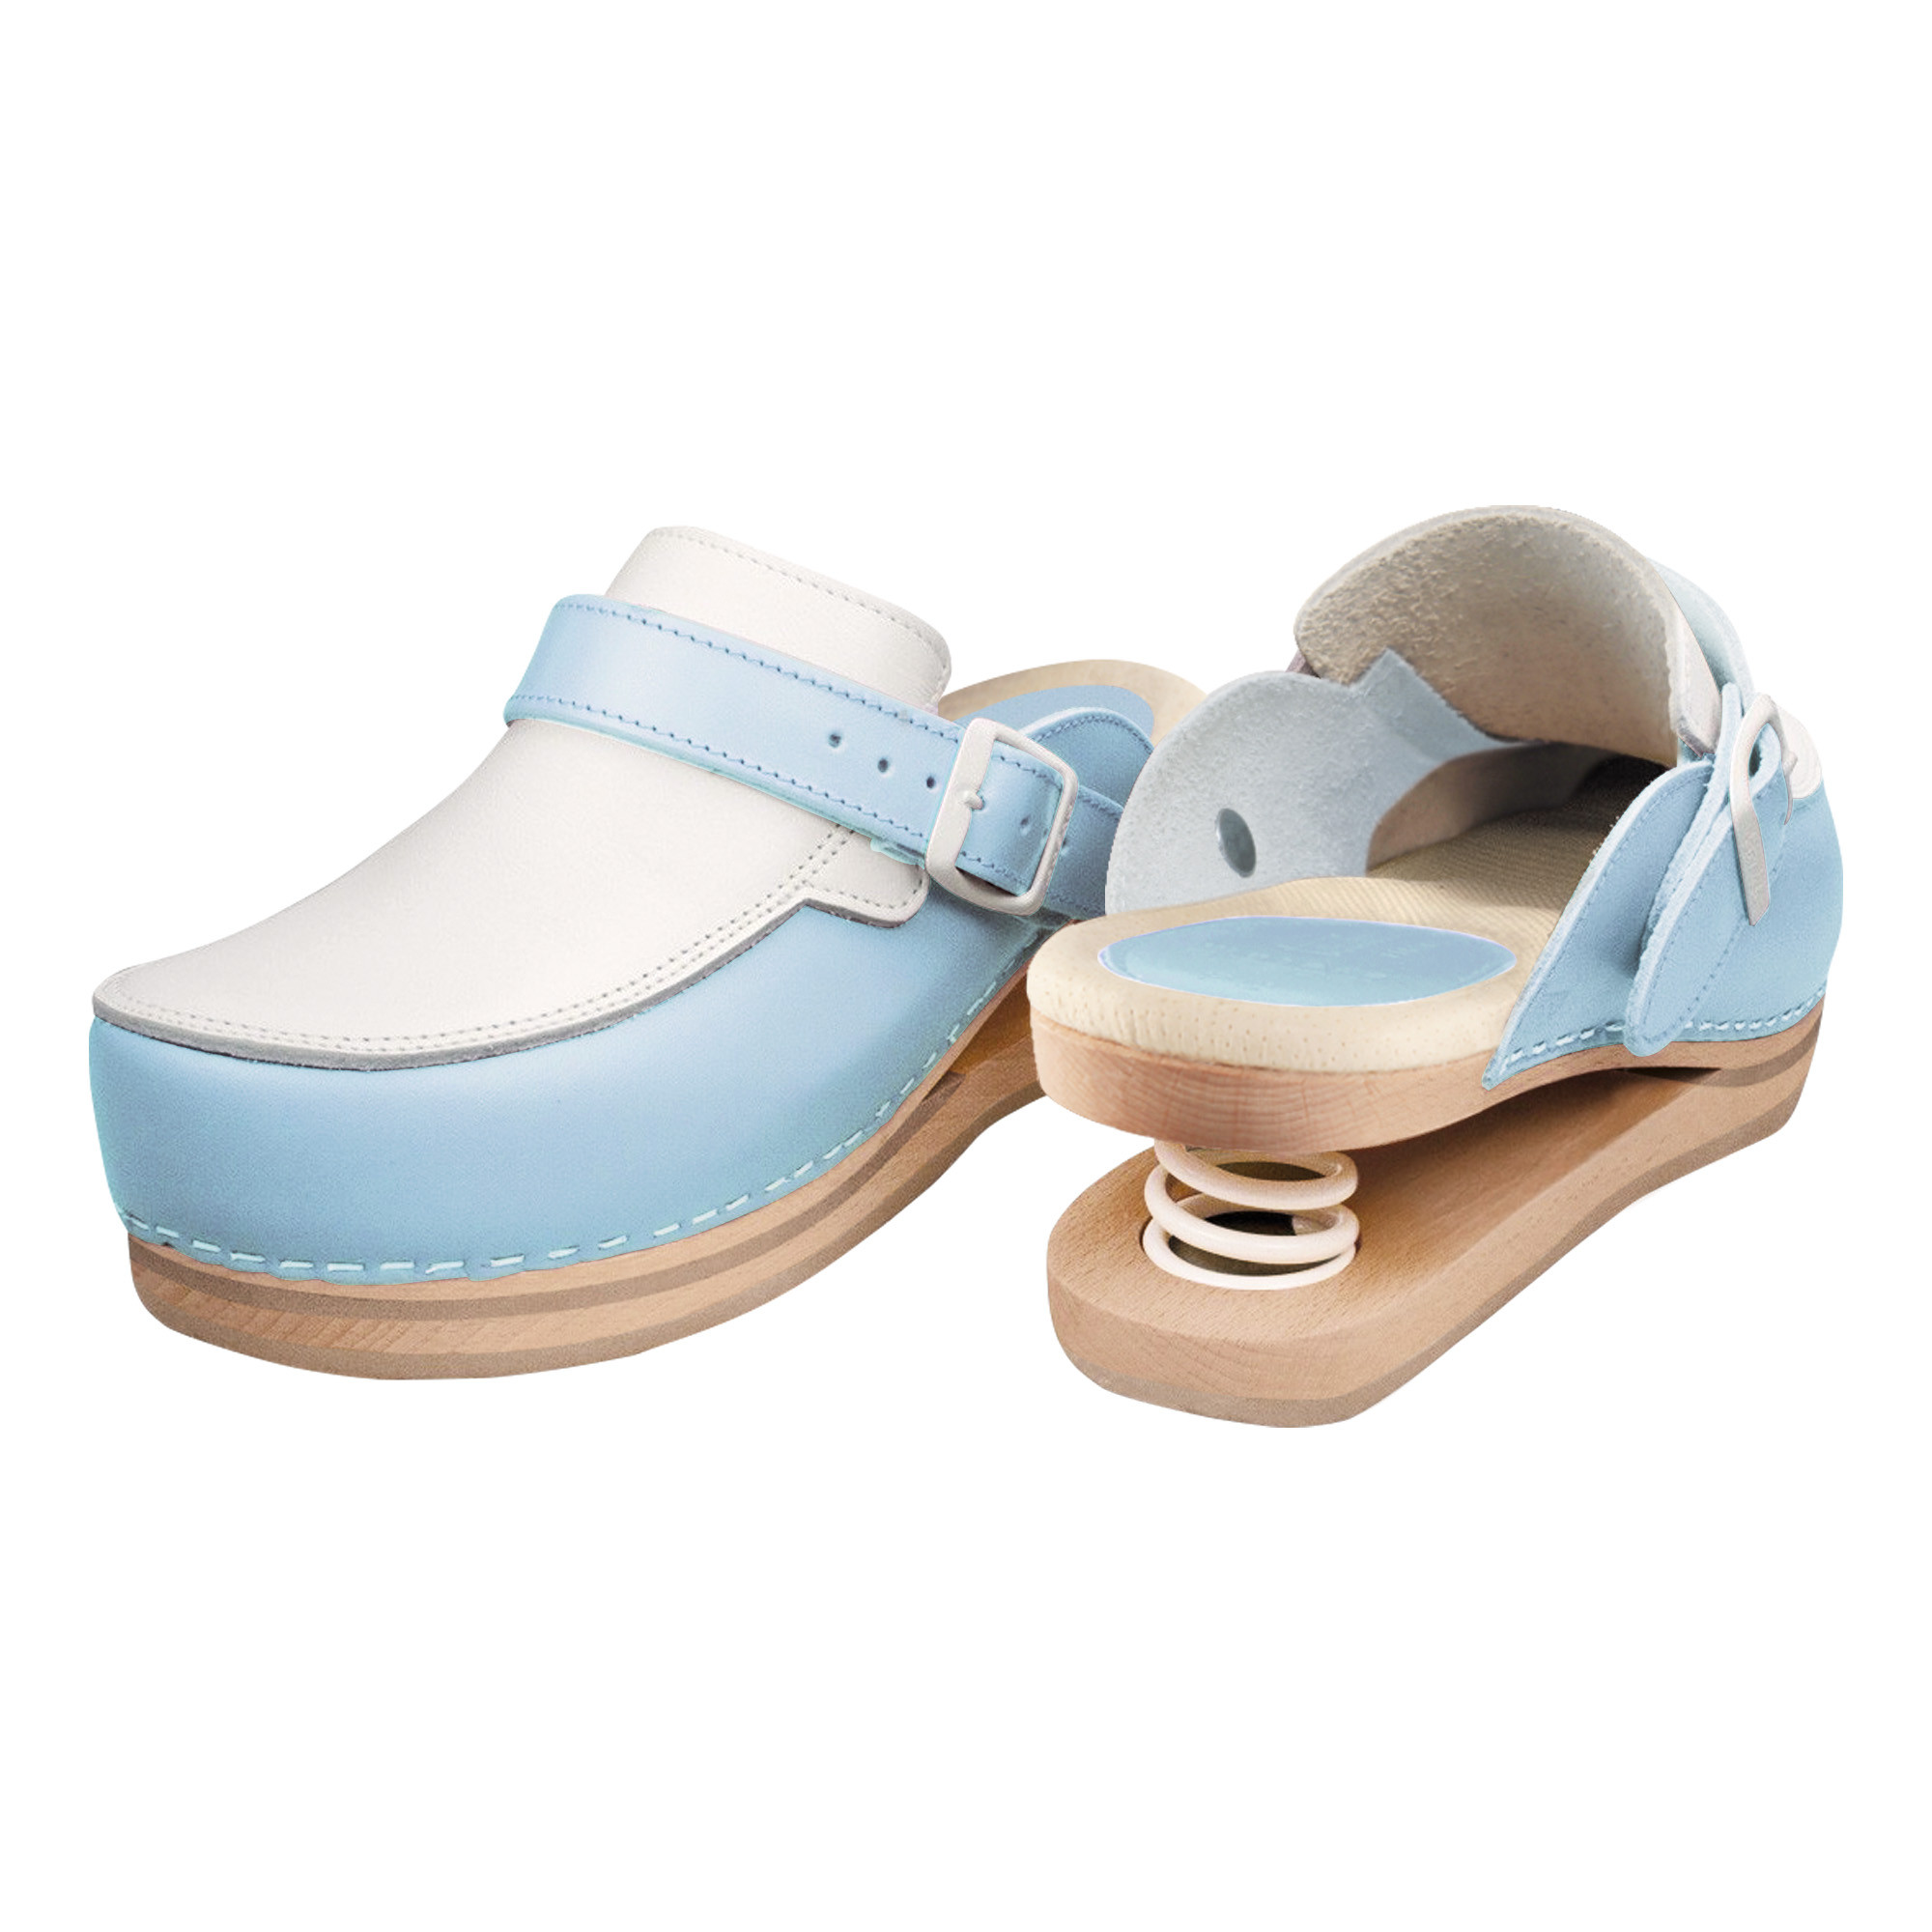 Relax clogs closed with blue spring Size 35